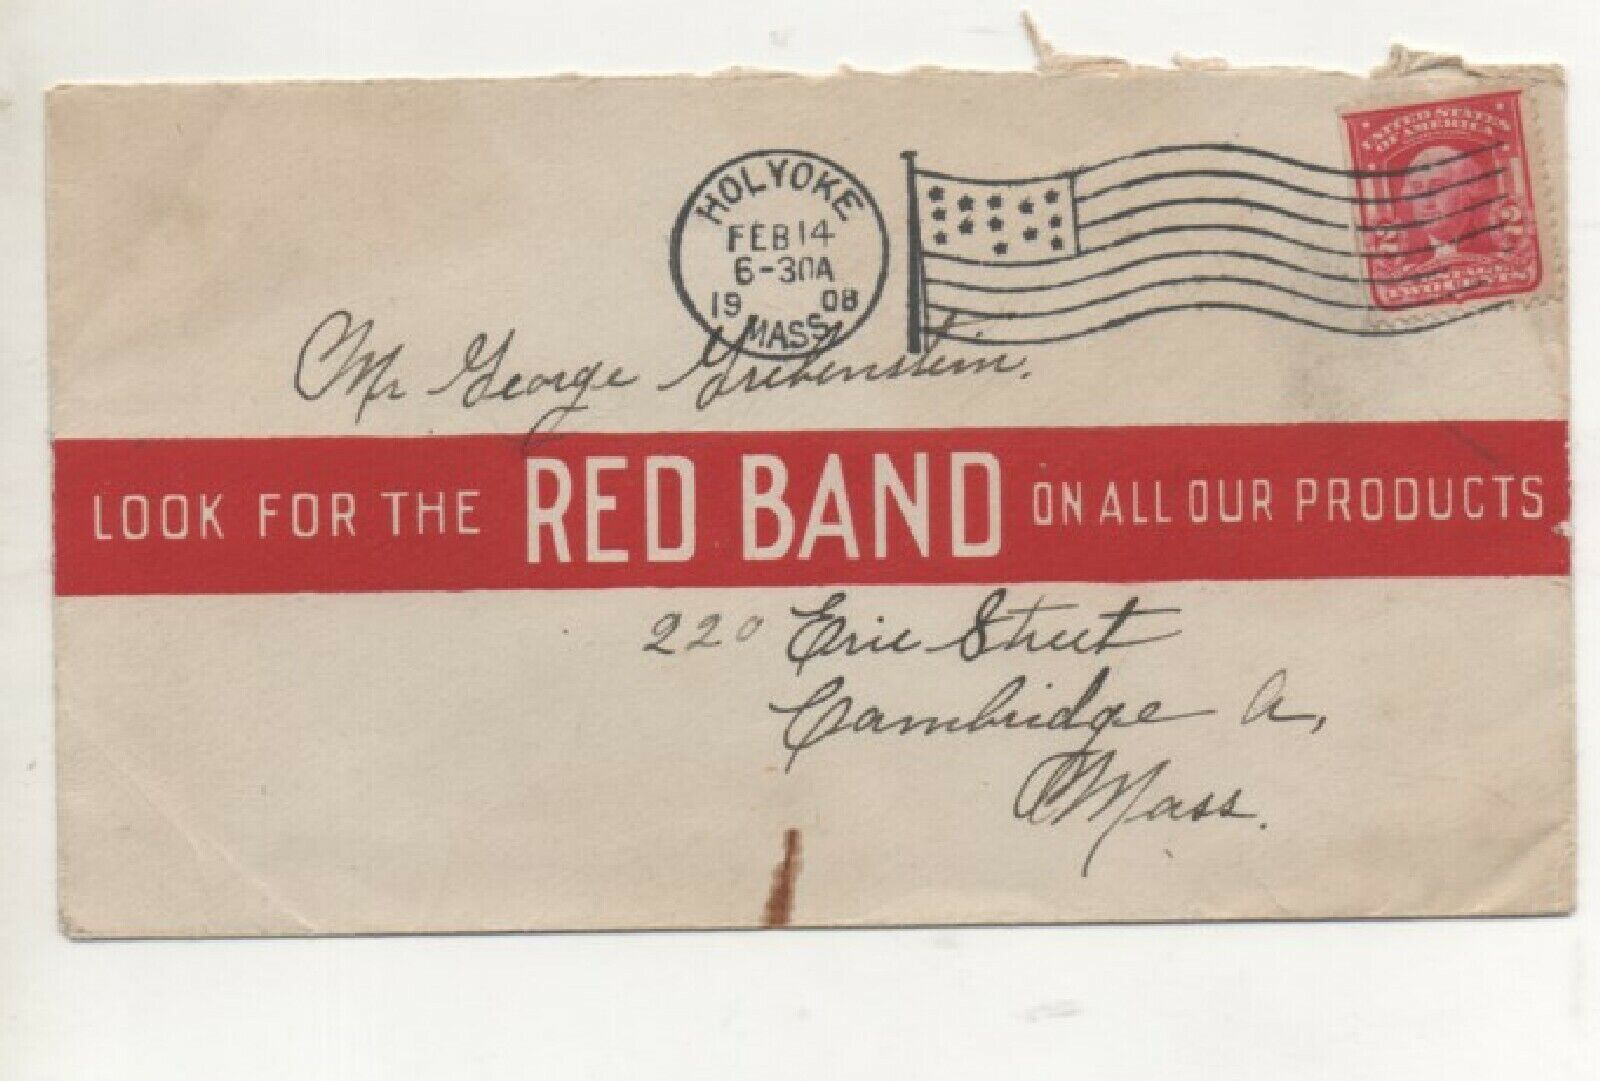 Sponsor Promotional Envelope For Wild Bill  Hitchcock Red Band Products 1908